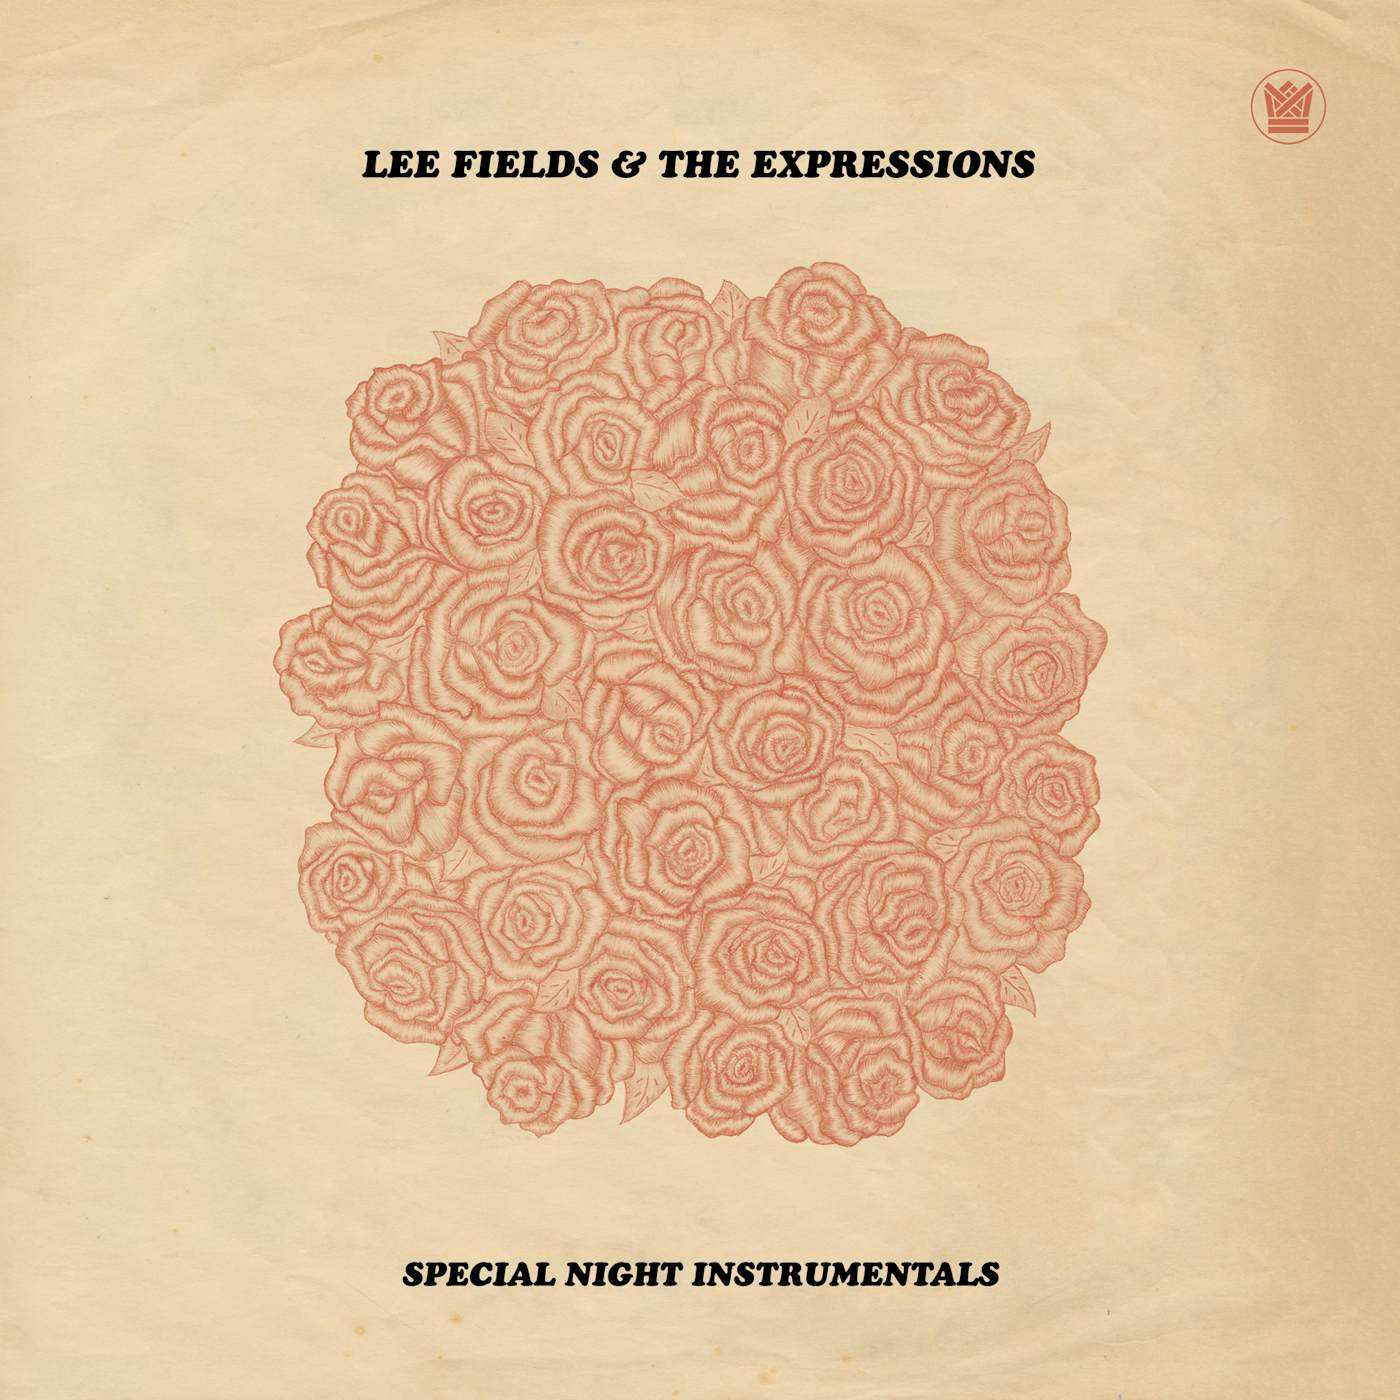 Lee Fields & The Expressions SPECIAL NIGHT INSTRUMENTALS Vinyl Record